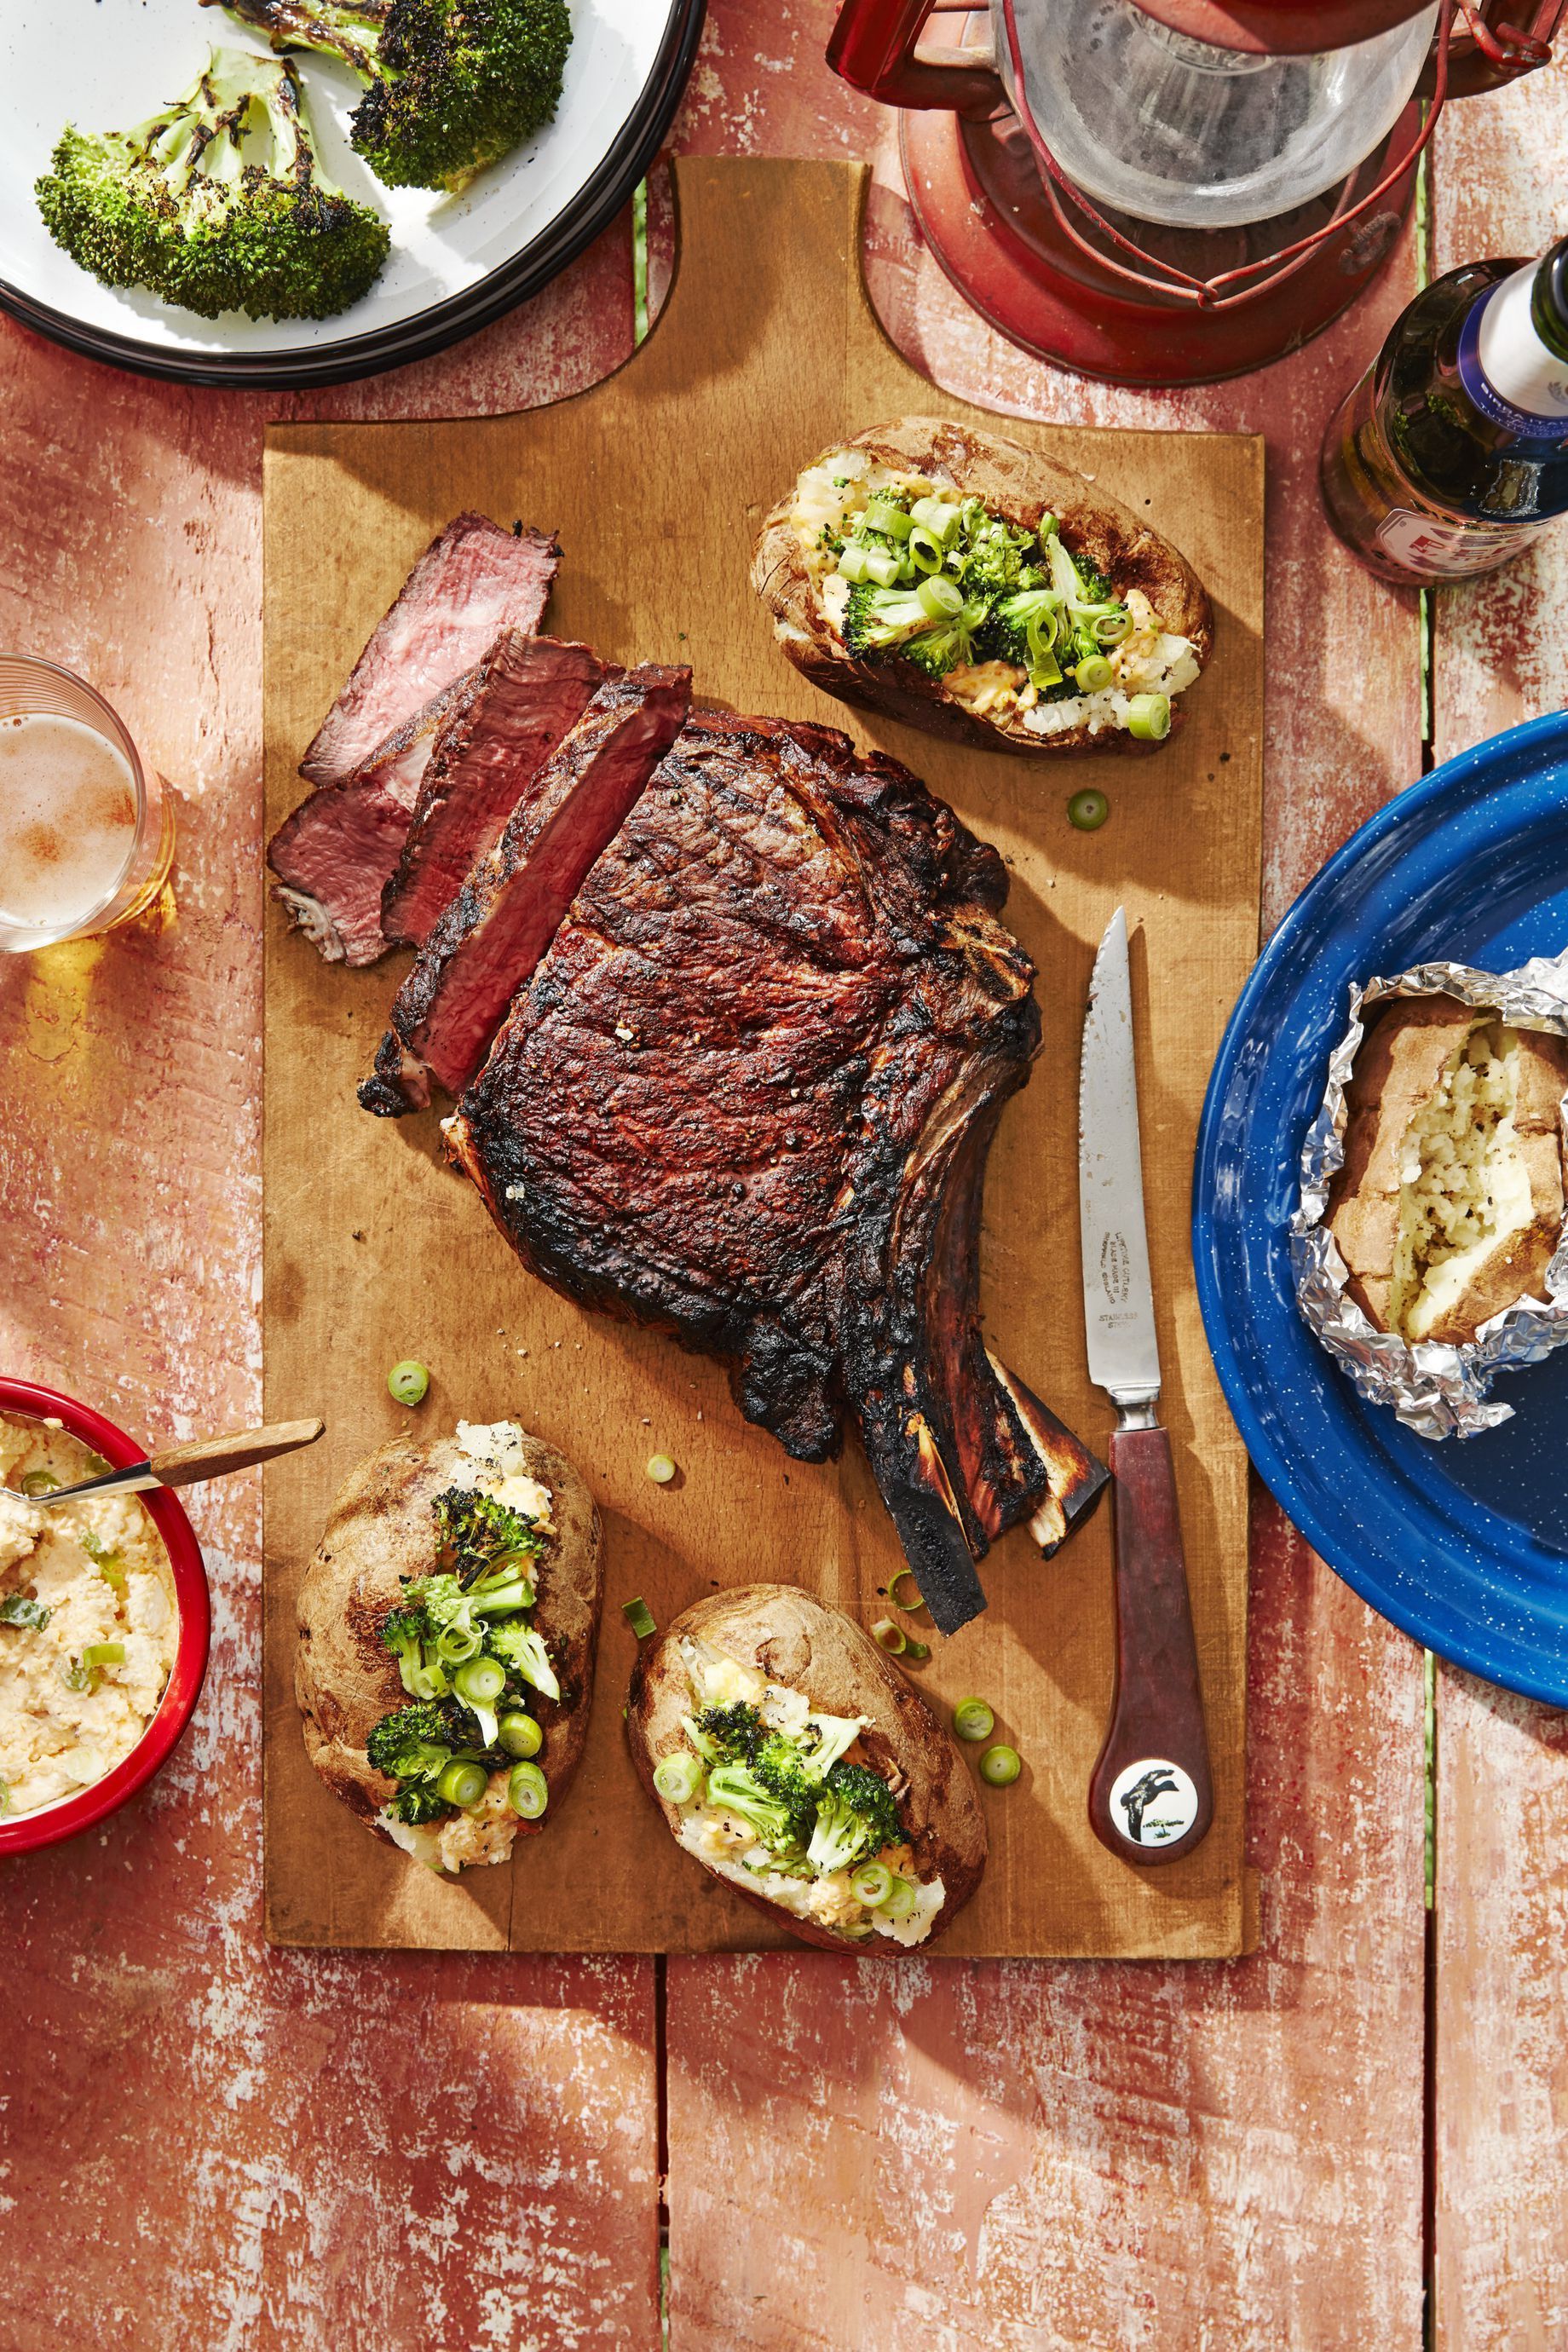 Yee-Haw!! Cowboy Steaks and Potatoes with Broccoli and Cheddar-Scallion Spread Recipe